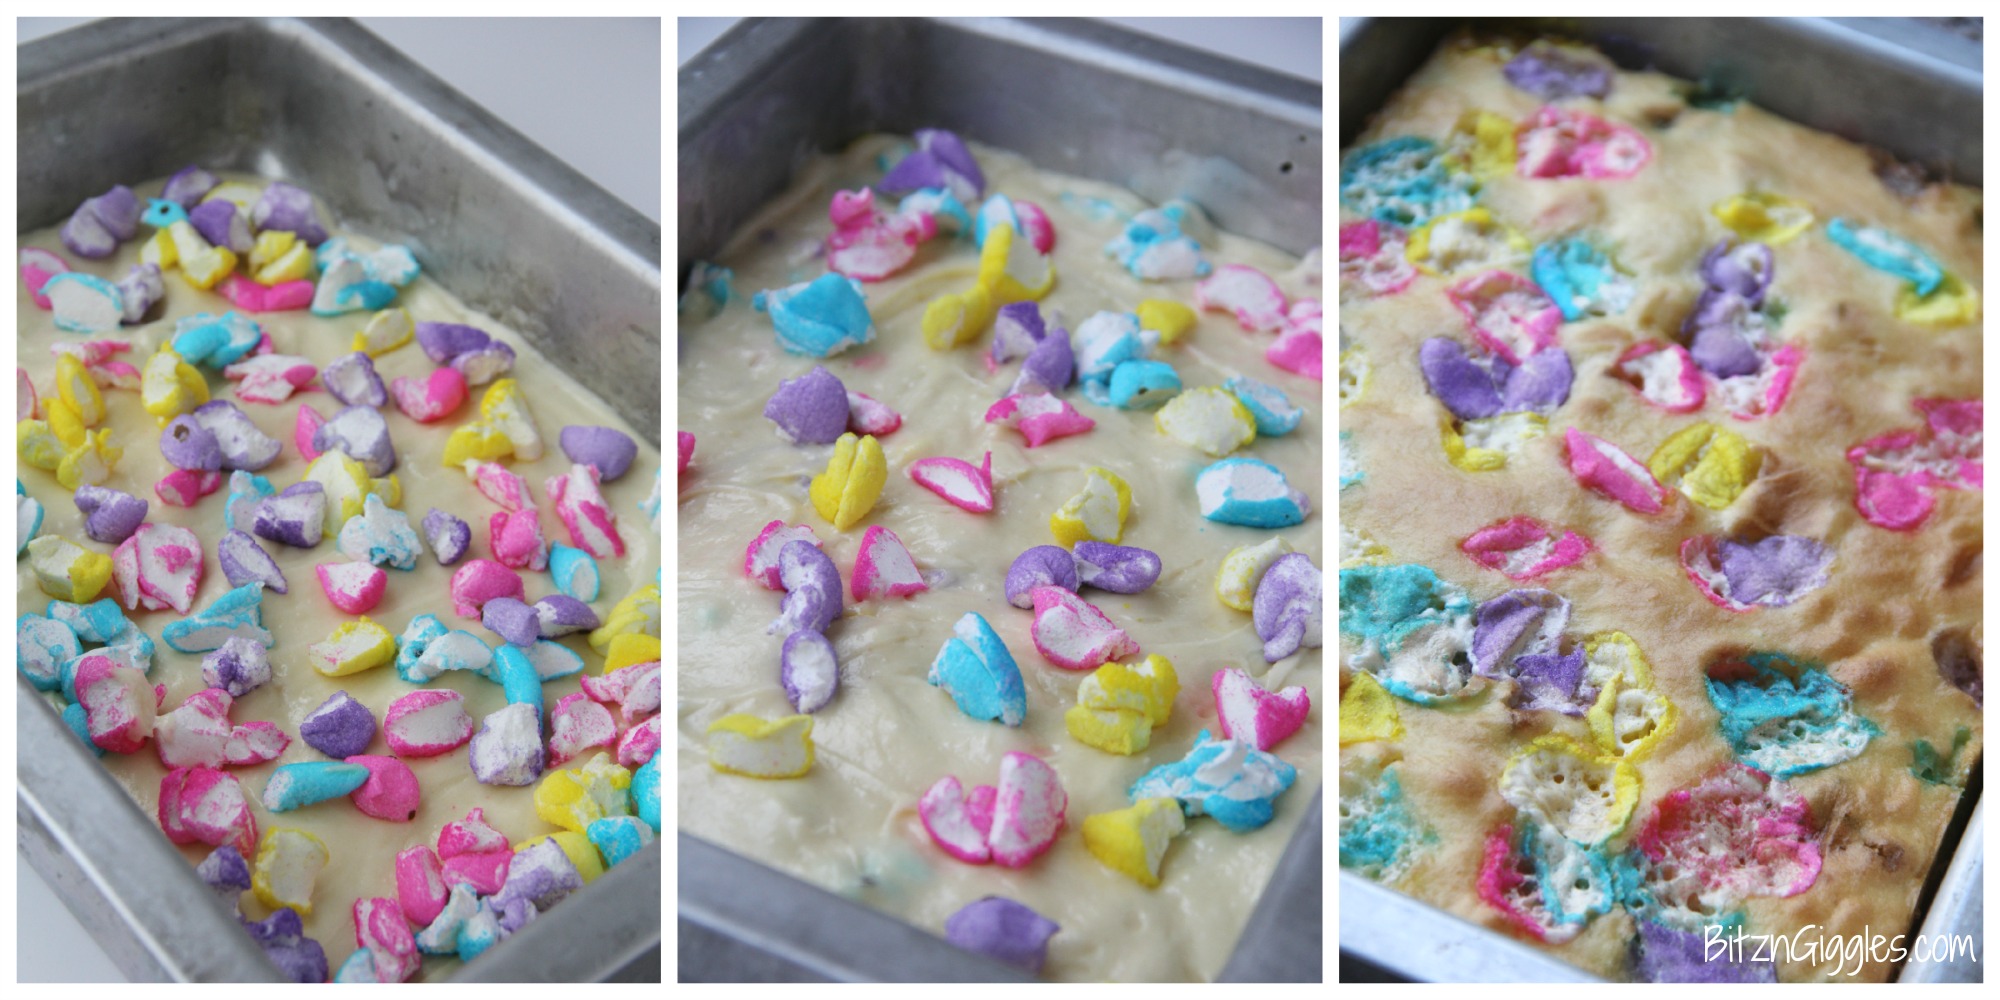 Peeps Cake With Marshmallow Frosting - This cake incorporates bits of Peeps right into the baking process, producing a colorful and slightly sweetened cake with a fluffy, marshmallow frosting that literally melts in your mouth!